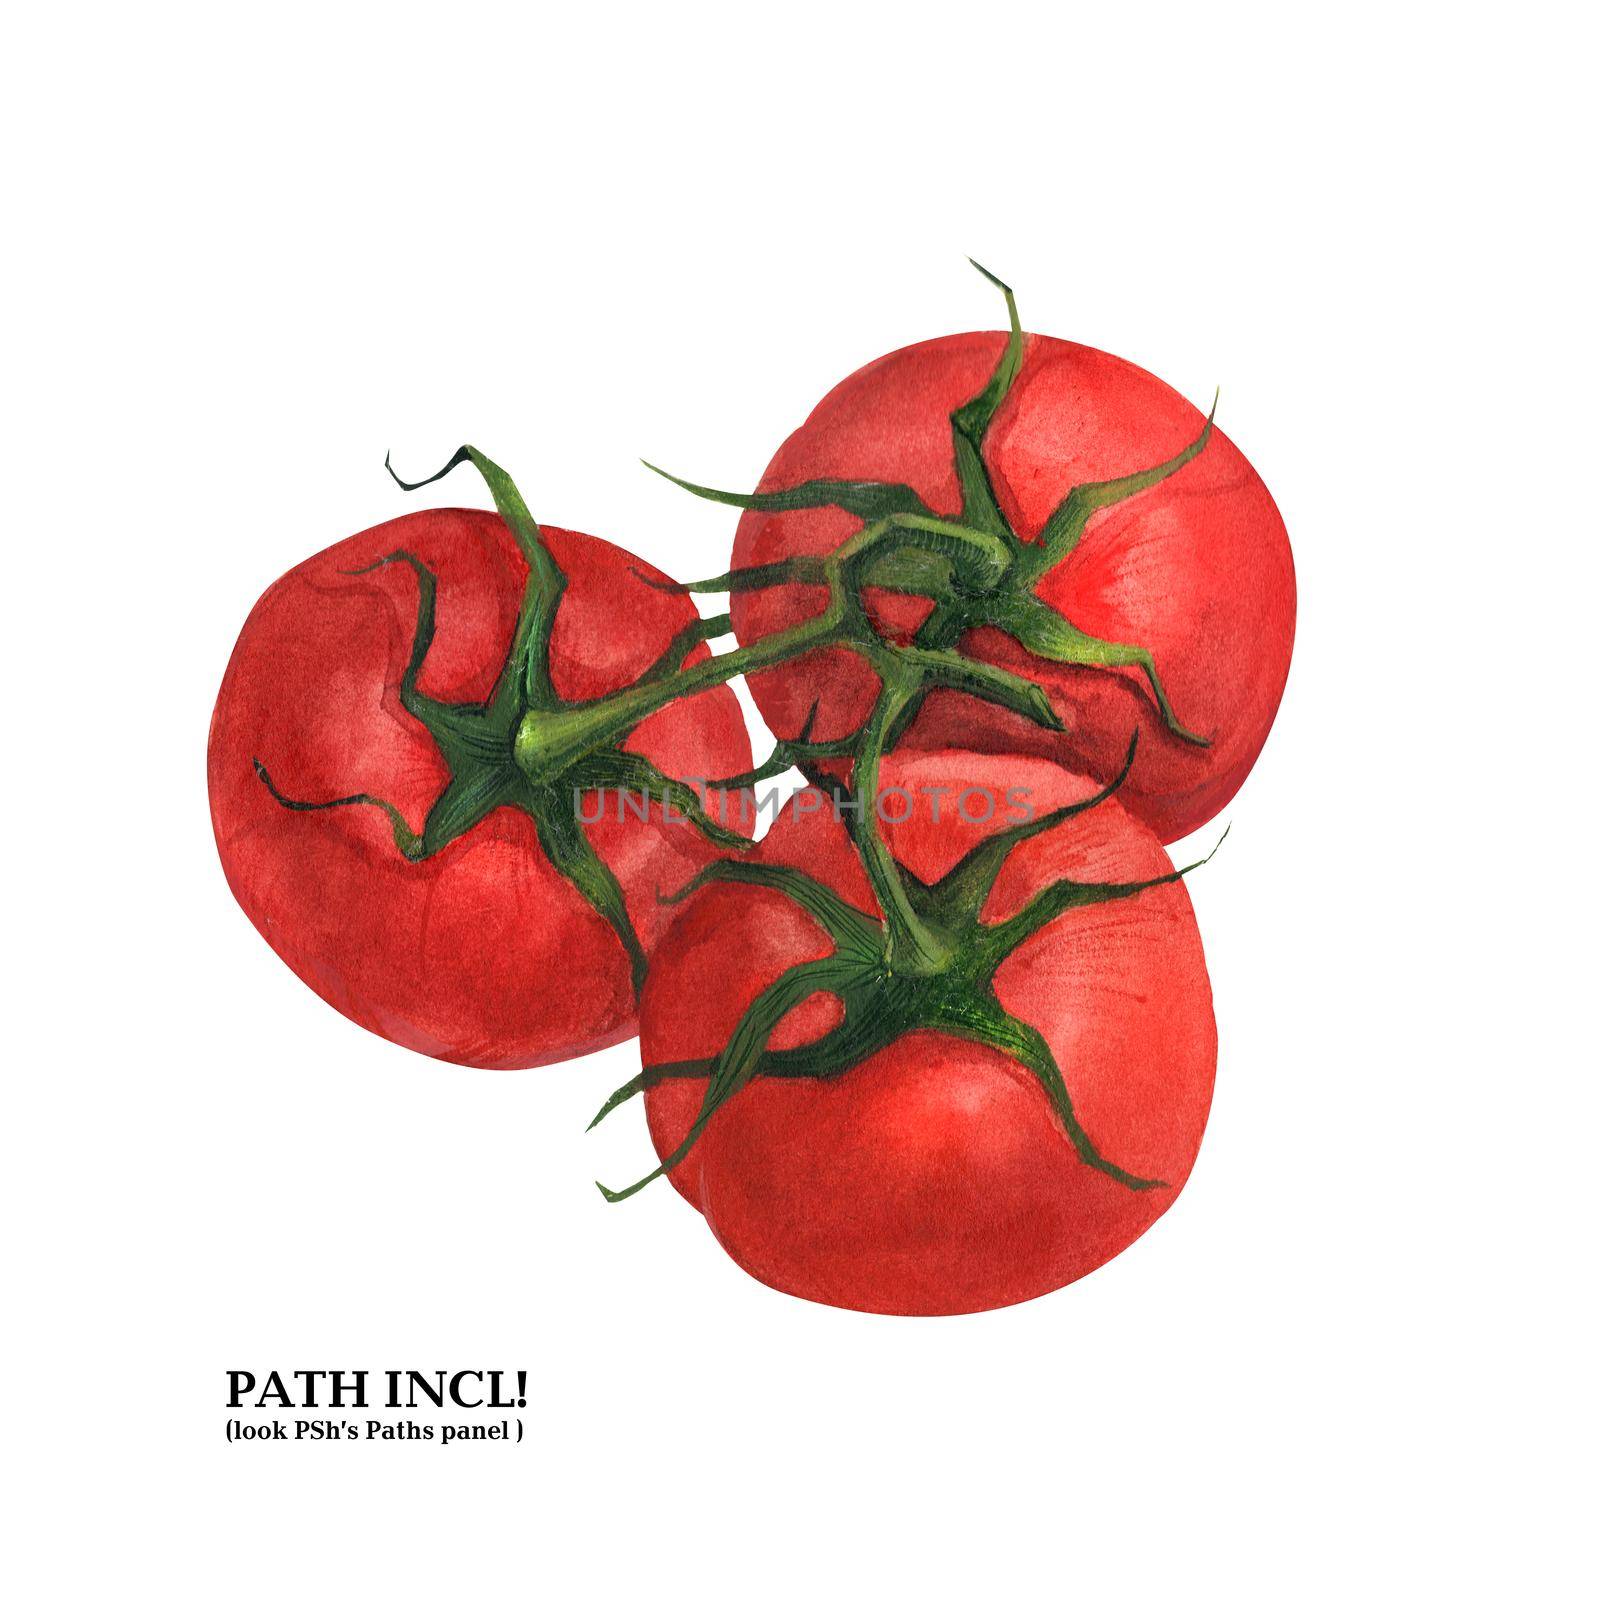 Watercolor botanical illustration. Tomatoes on a white background, path included.